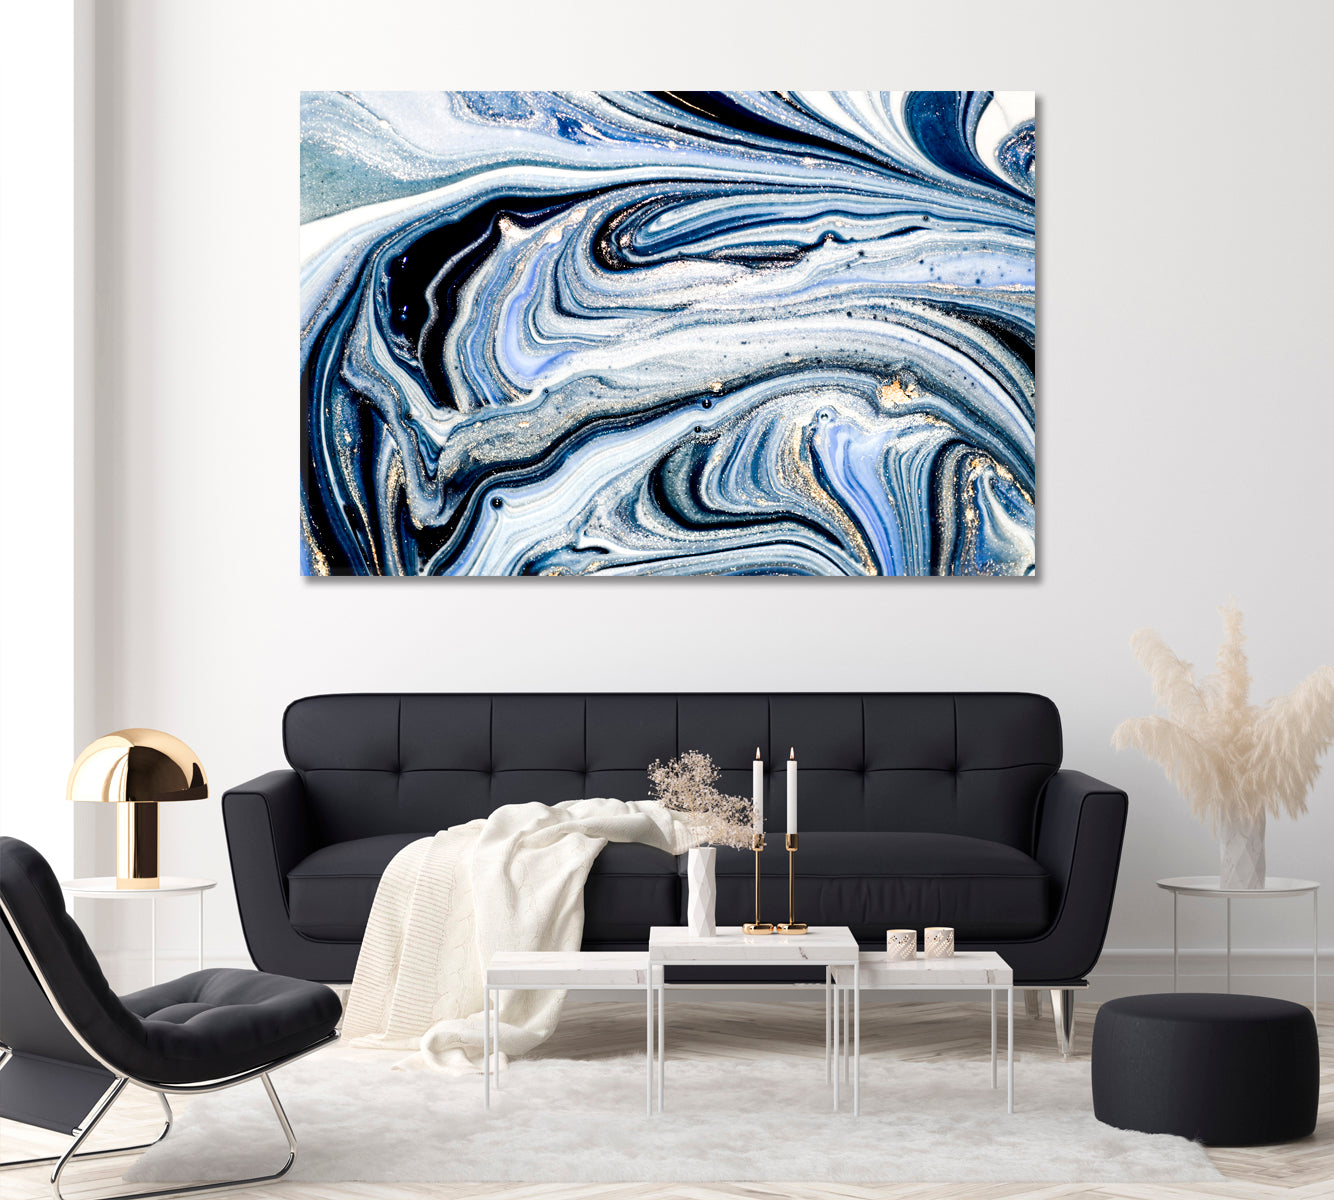 Abstract Liquid Swirls of Marble Canvas Print ArtLexy 1 Panel 24"x16" inches 